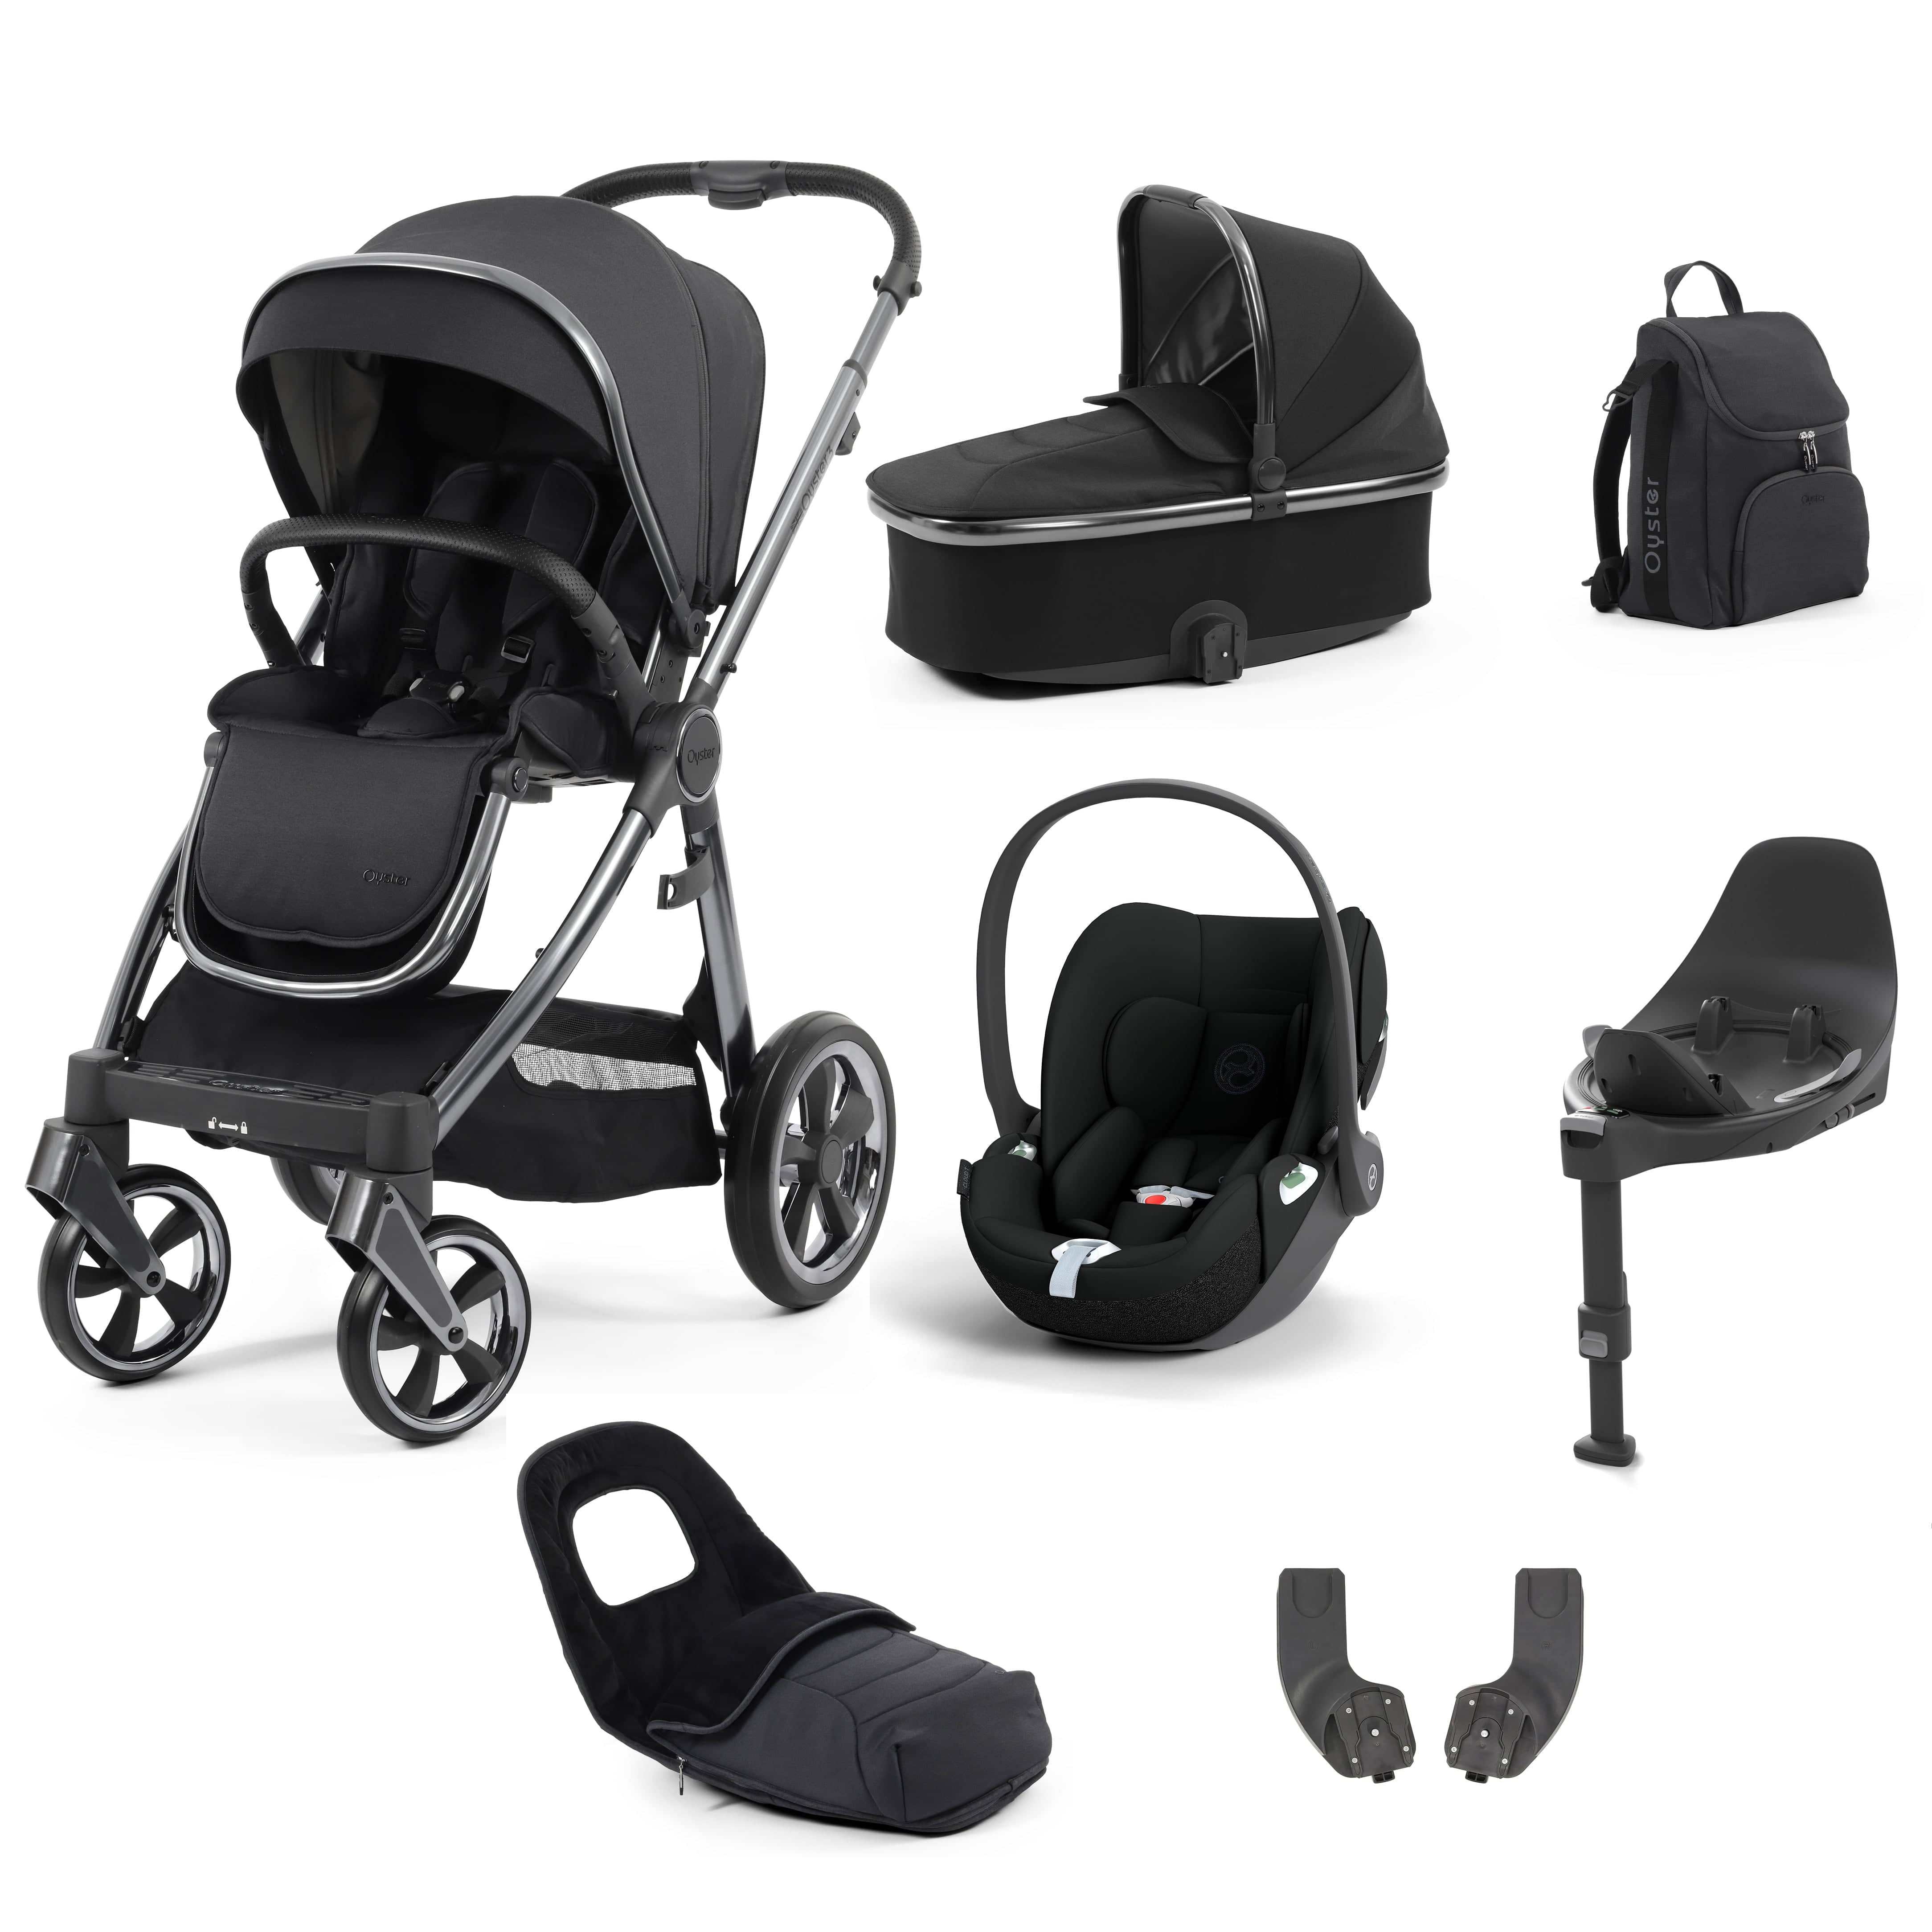 BabyStyle travel systems Babystyle Oyster 3 Luxury 7 Piece with Car Seat Bundle in Carbonite 14798-CRB